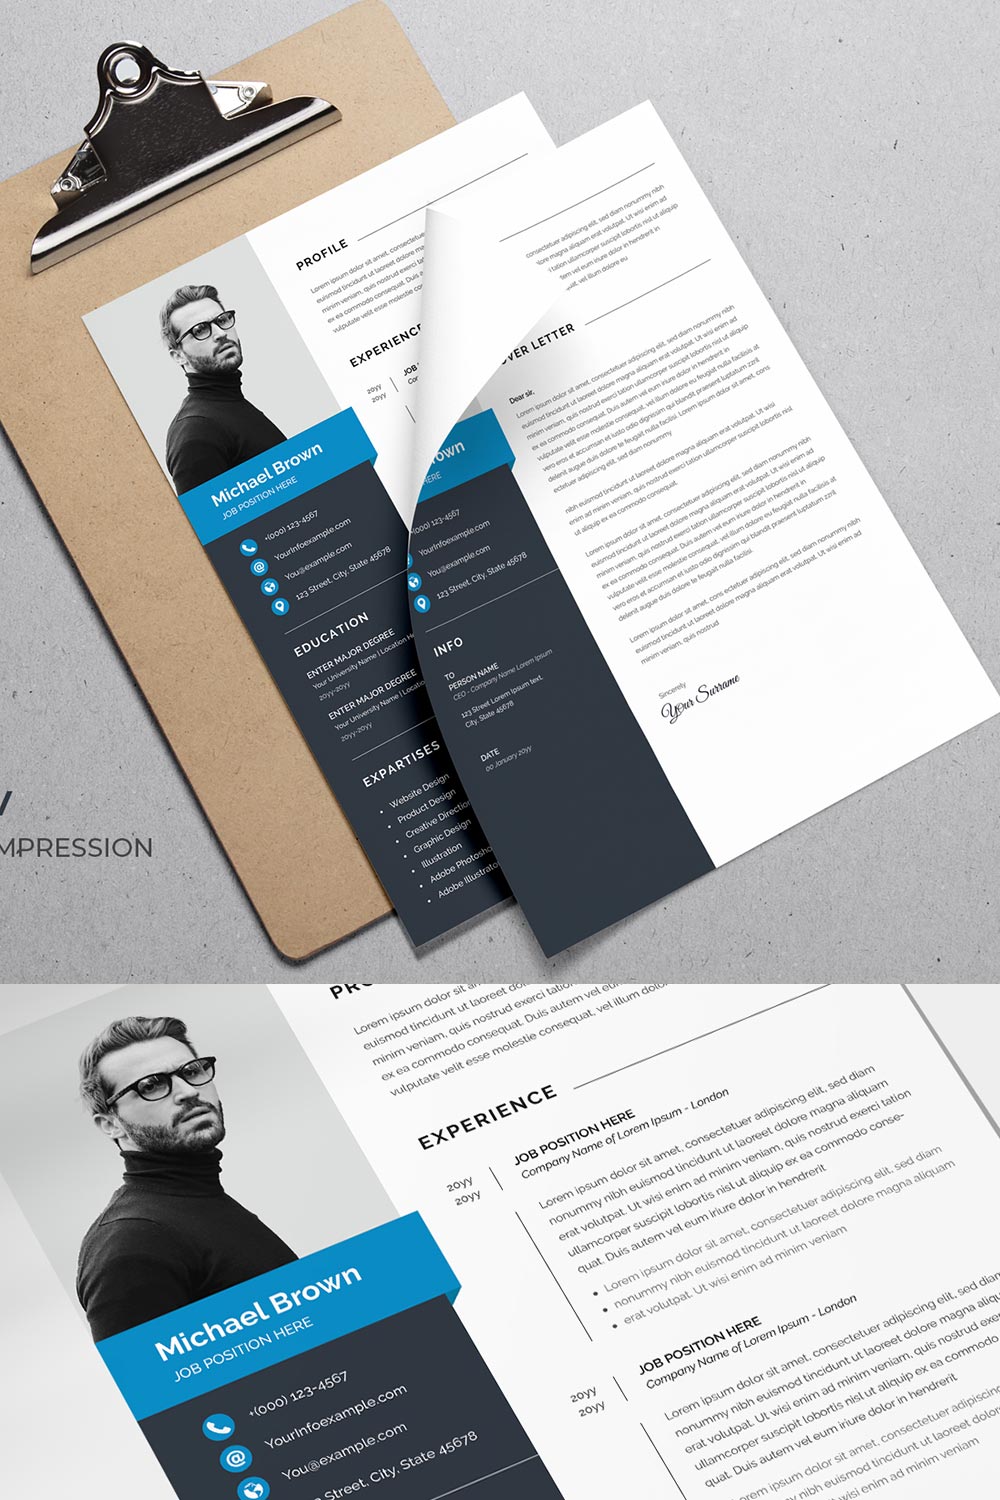 Clean and professional resume template with blue accents.